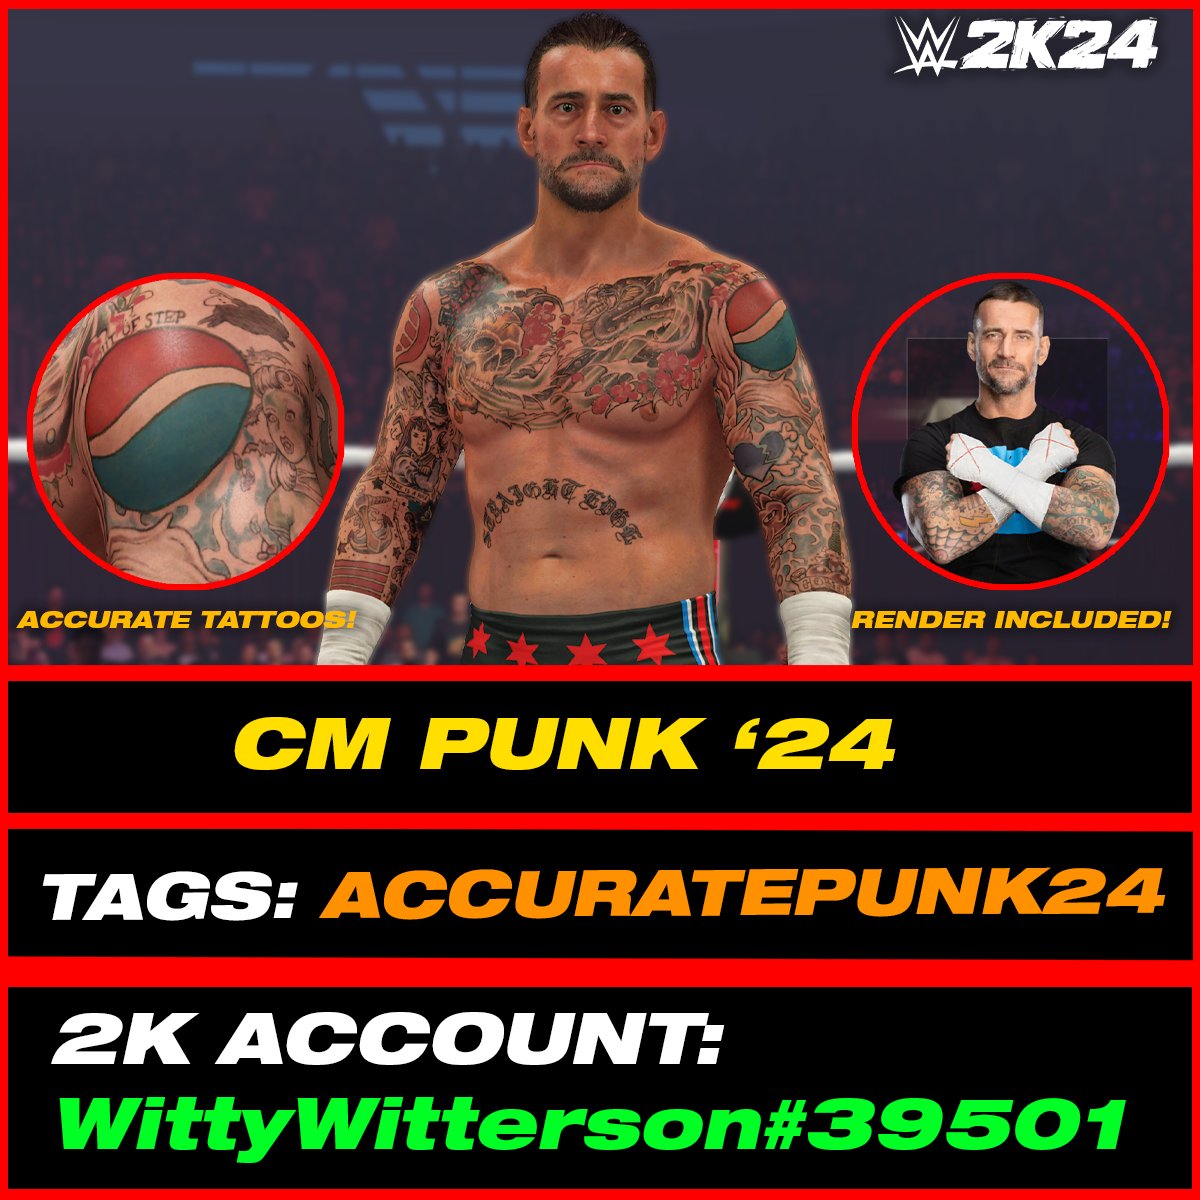 CM Punk '24 (In-Game Edit) is uploaded onto Community Creations #WWE2K24 

•Hashtags are: ACCURATEPUNK24, WITTY226, CMPunk

INCLUDES:

• Render
• 'CM Punk' Call Name
• Commentary
• Accurate Tattoos

• Automatic Alt Attire for CM Punk